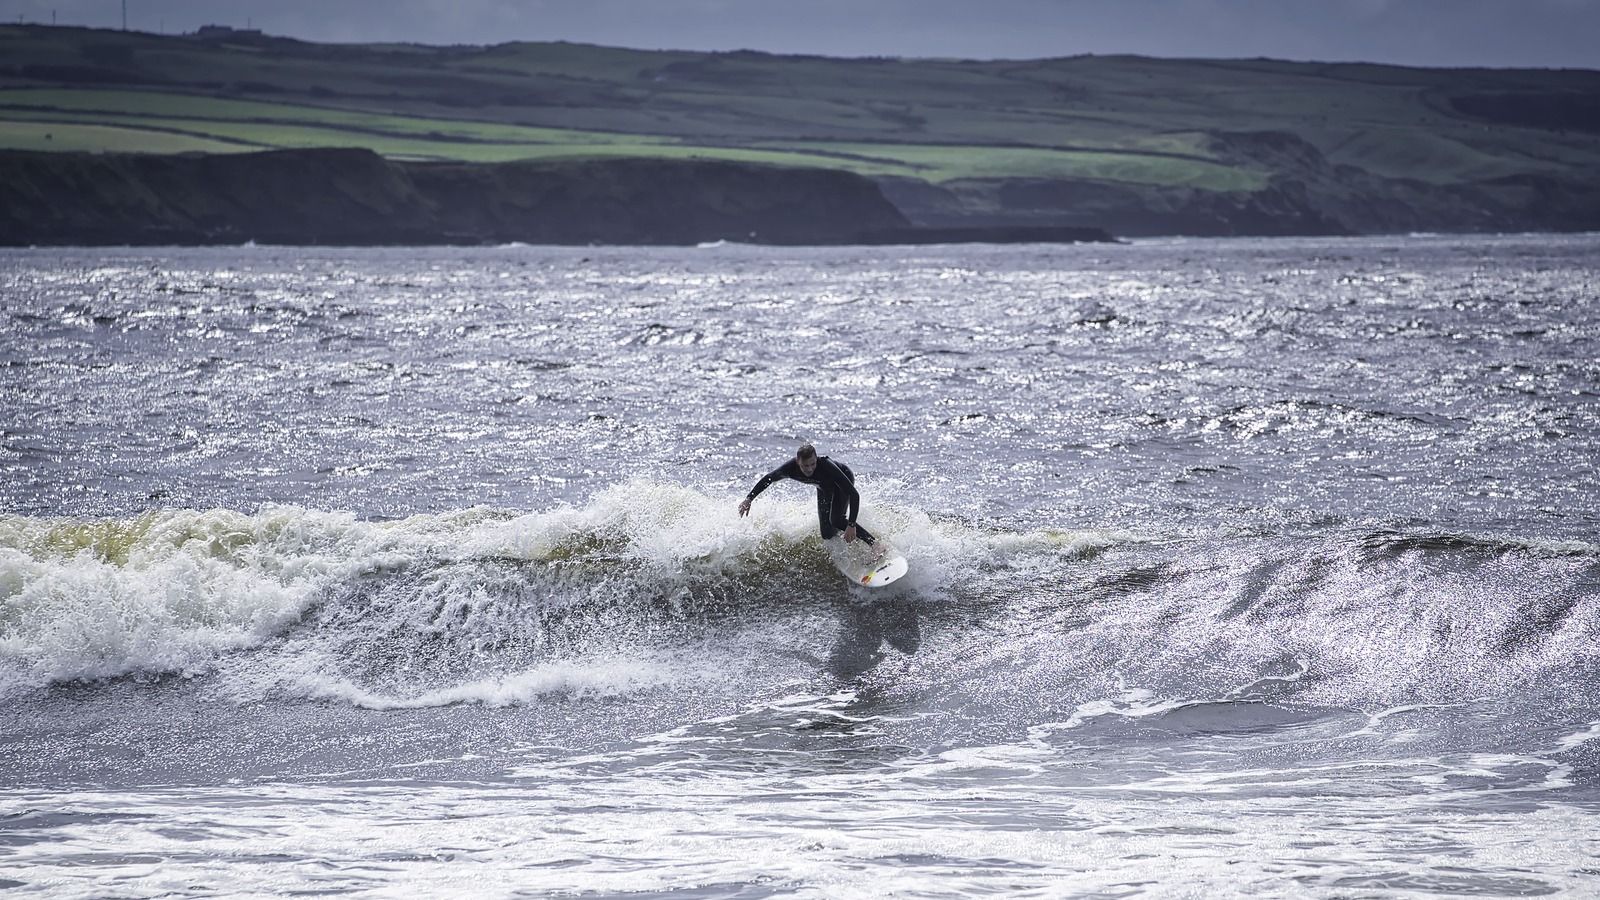 Surfing the waves, Lahinch, Co Clare_master (2)